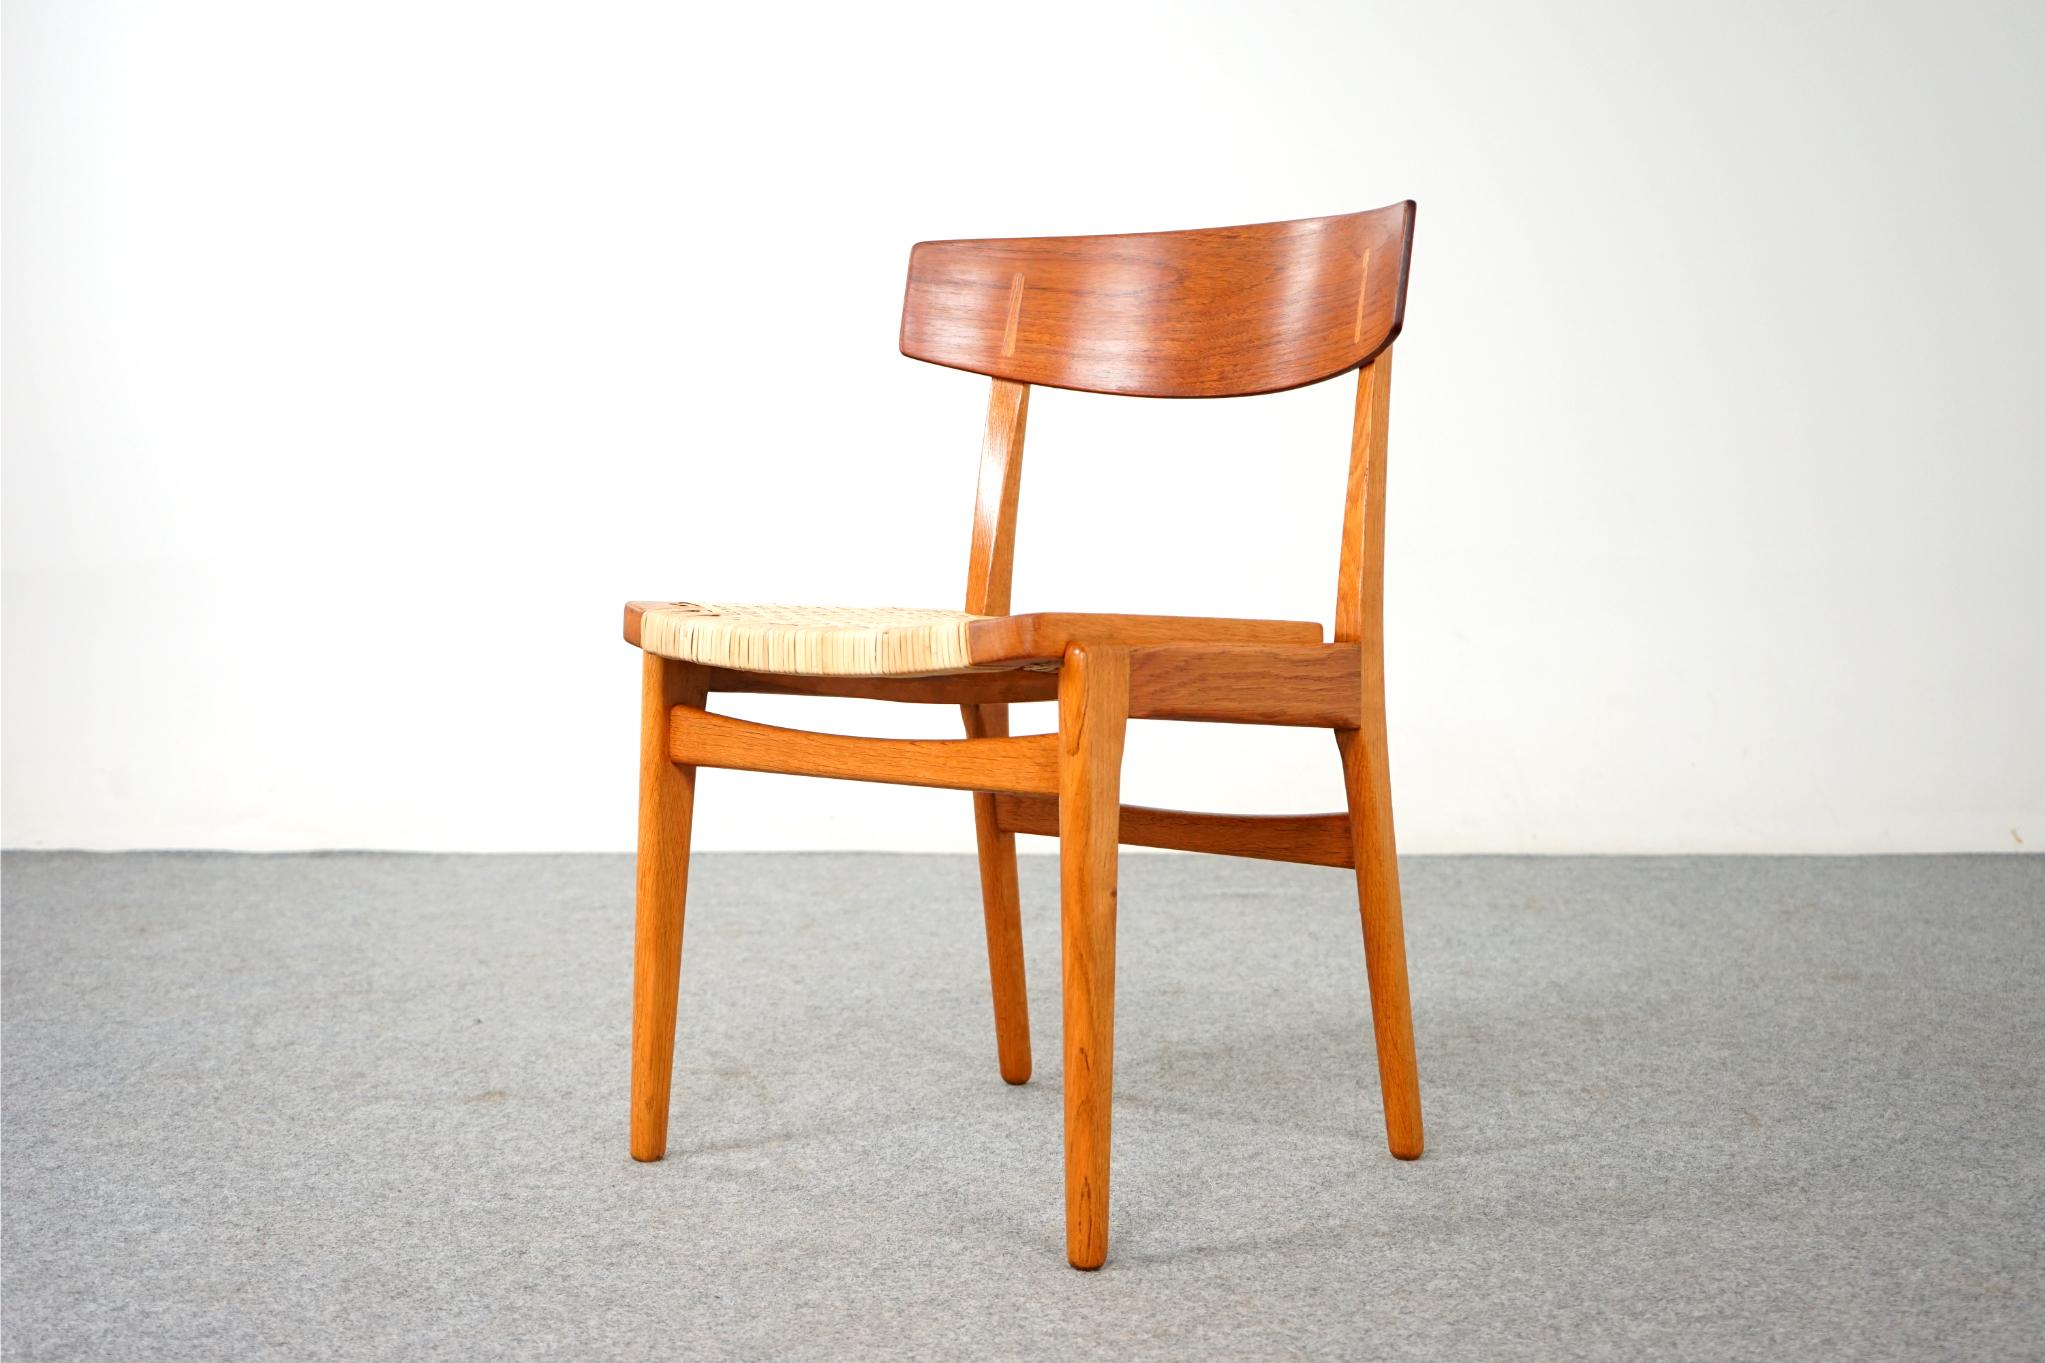 Teak & oak dining chair, circa 1960's. Solid oak frame compliments the beautifully curved teak veneer seatback, with contrasting oak cover caps. Newly woven rattan seat is very comfortable! Excellent construction and quality.

Please inquire for